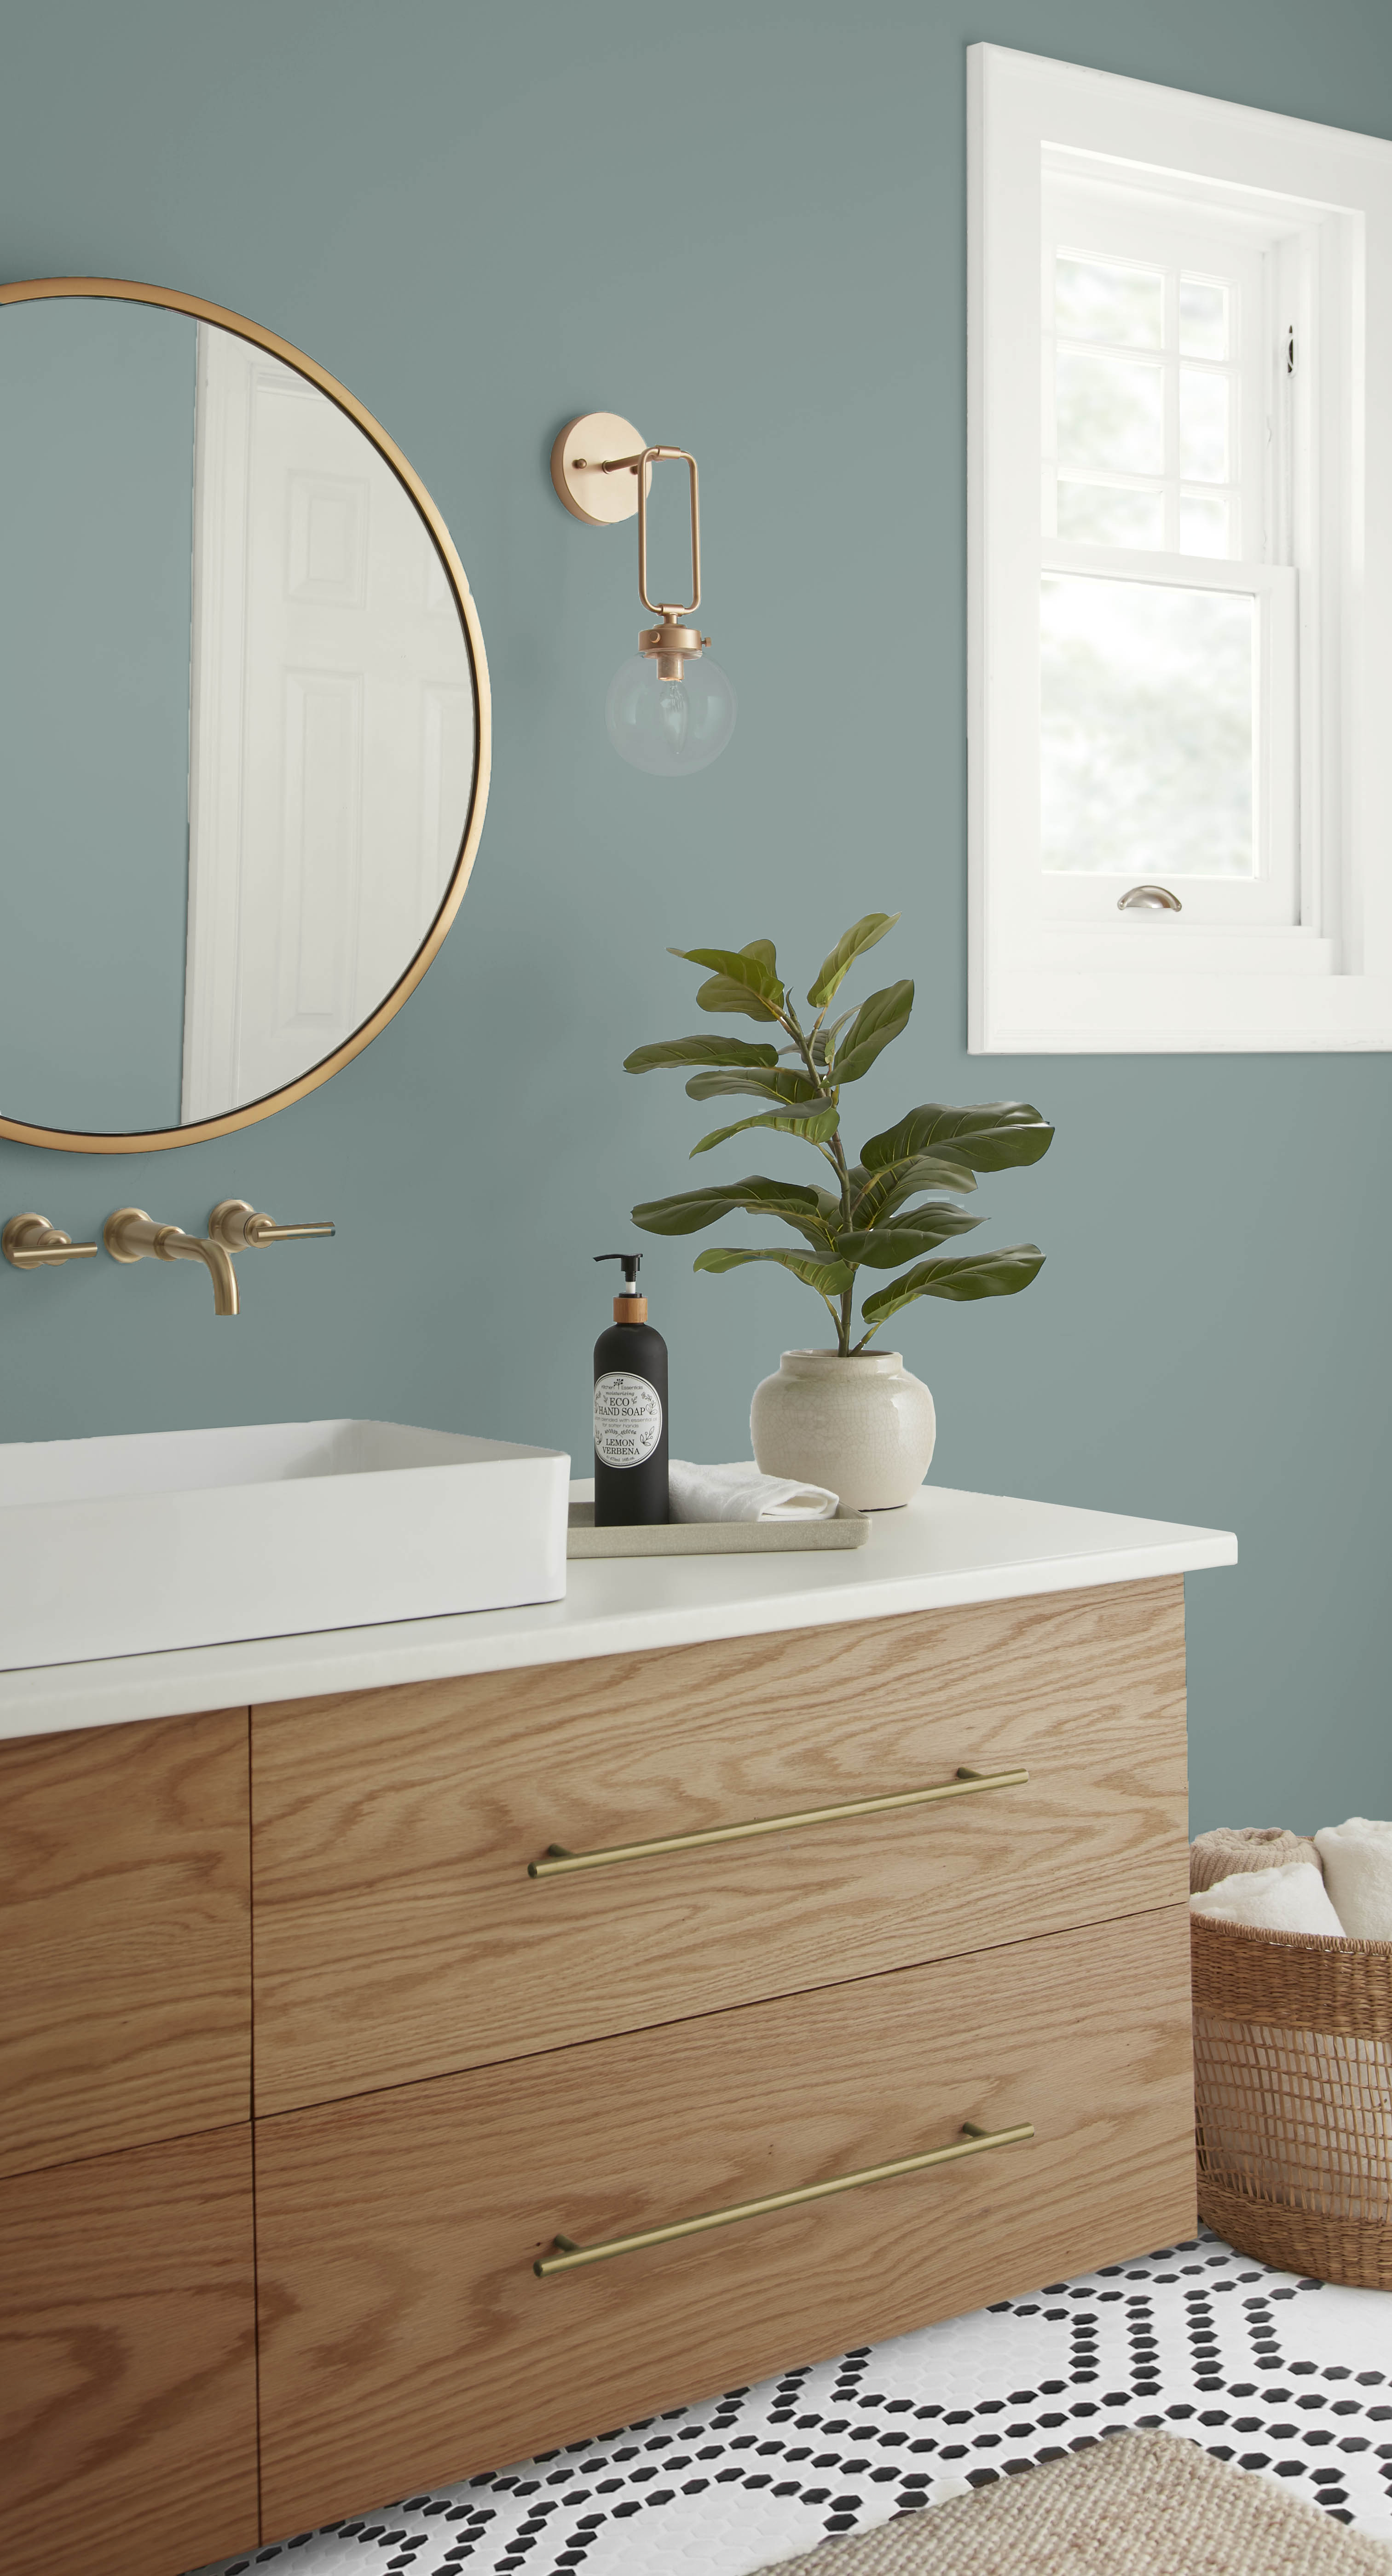 A closeup of a Scandinavian-style bathroom with walls painted in a dusty blue green colour